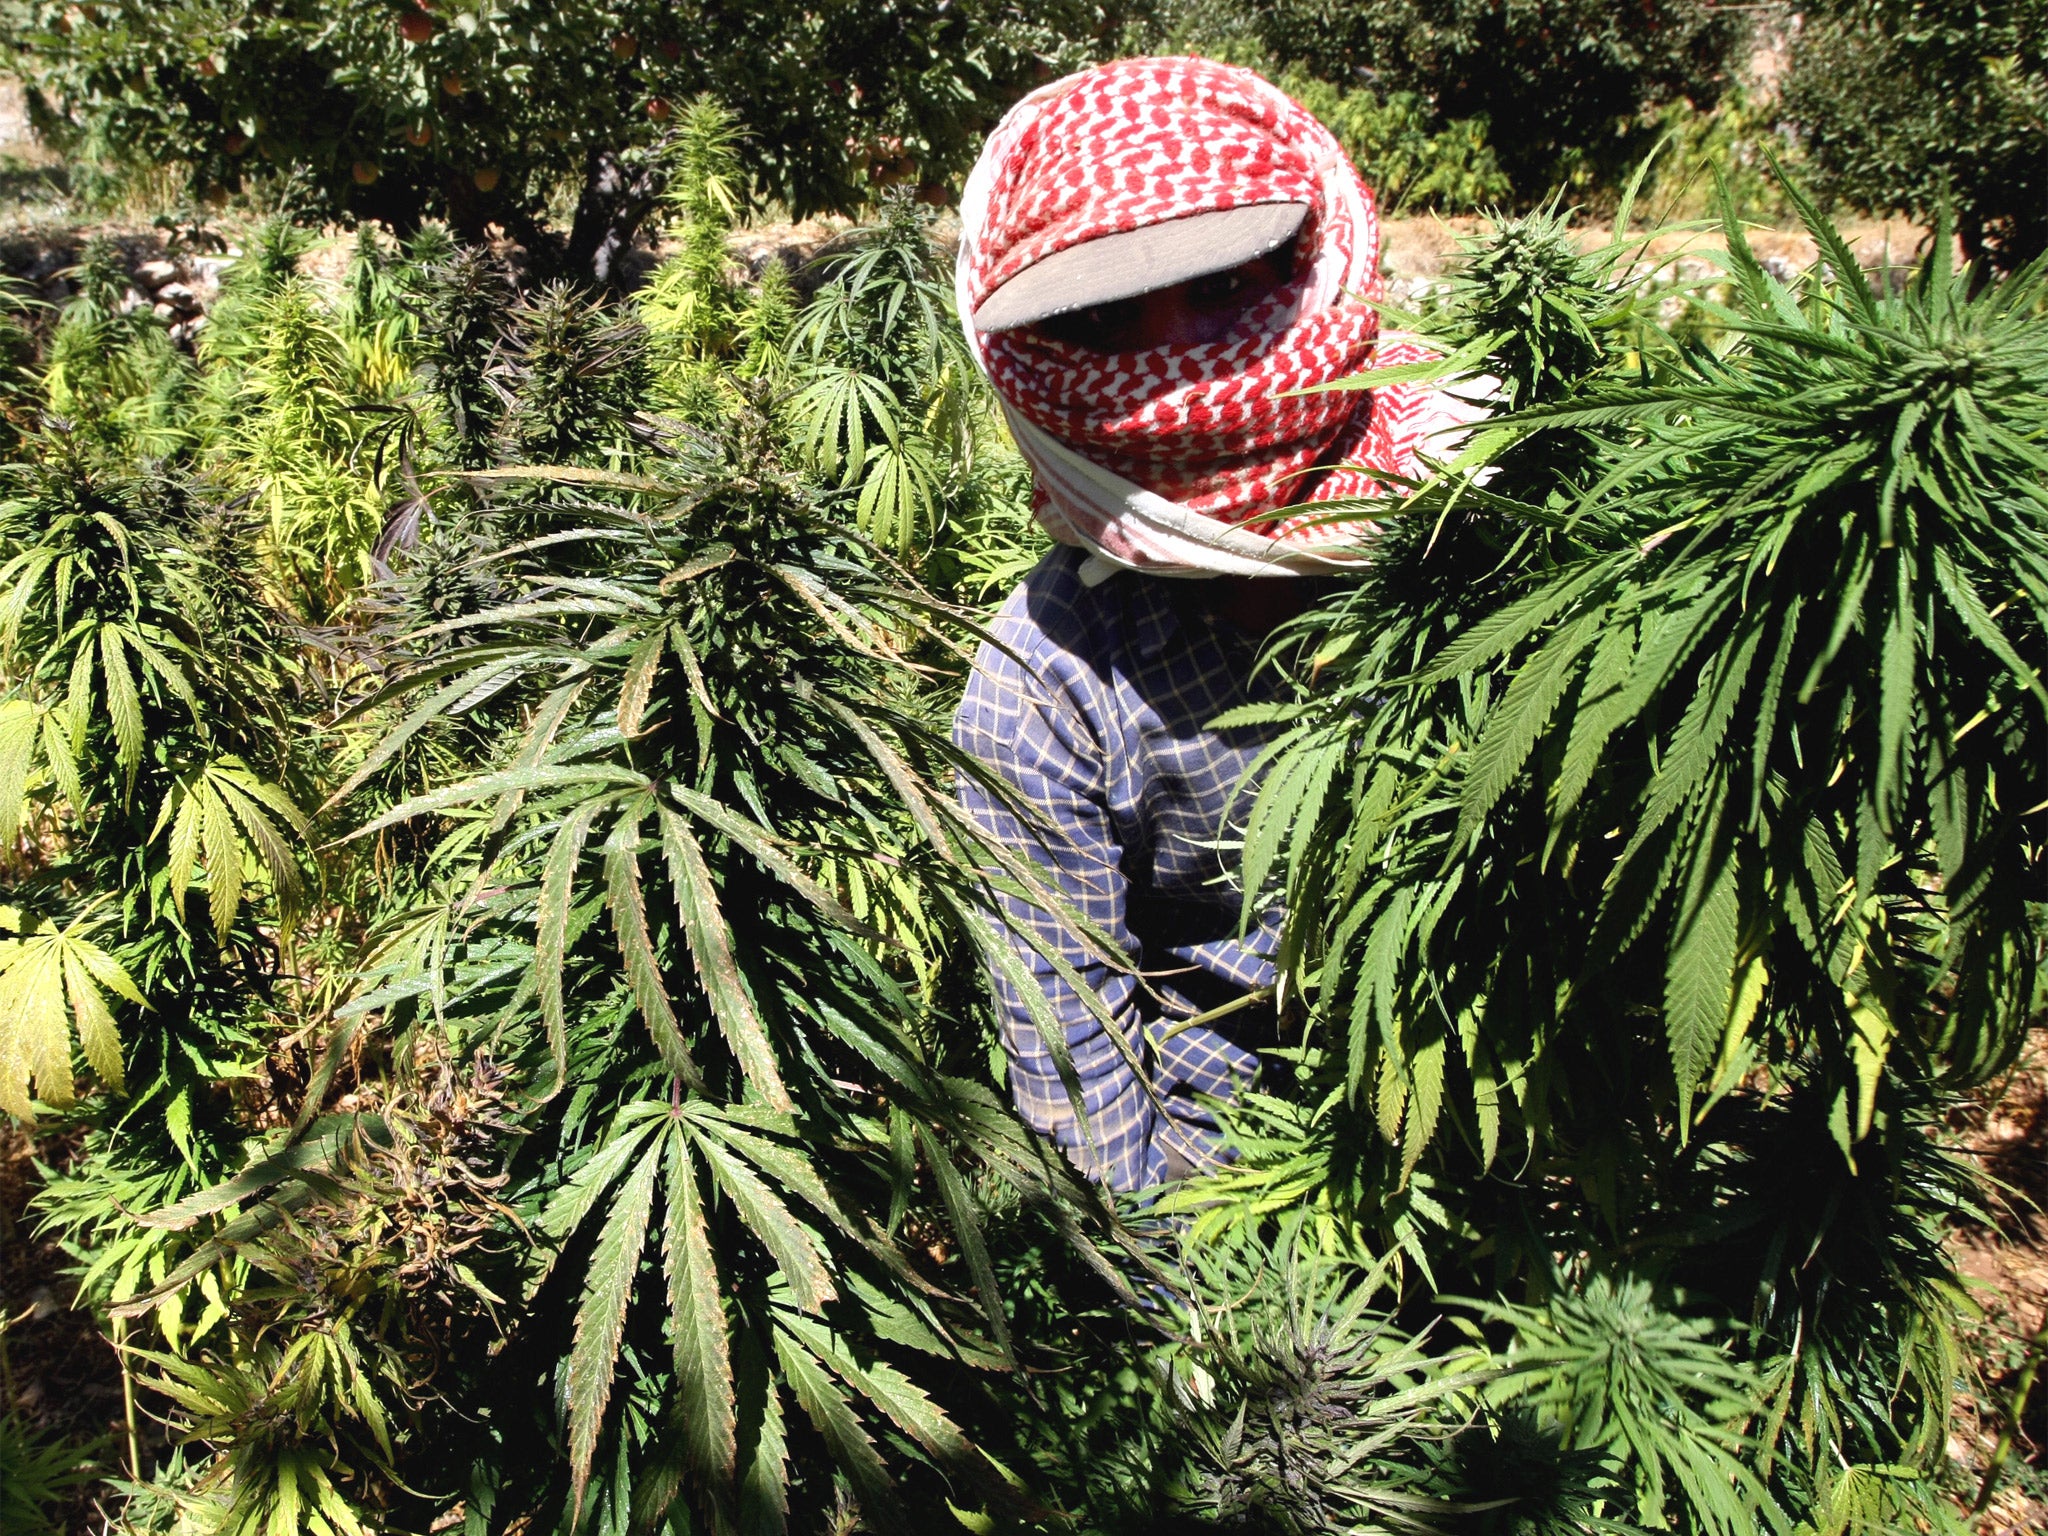 A Lebanese farmer harvests cannabis in the Bekaa valley amid a lack of security action because of regional turmoil